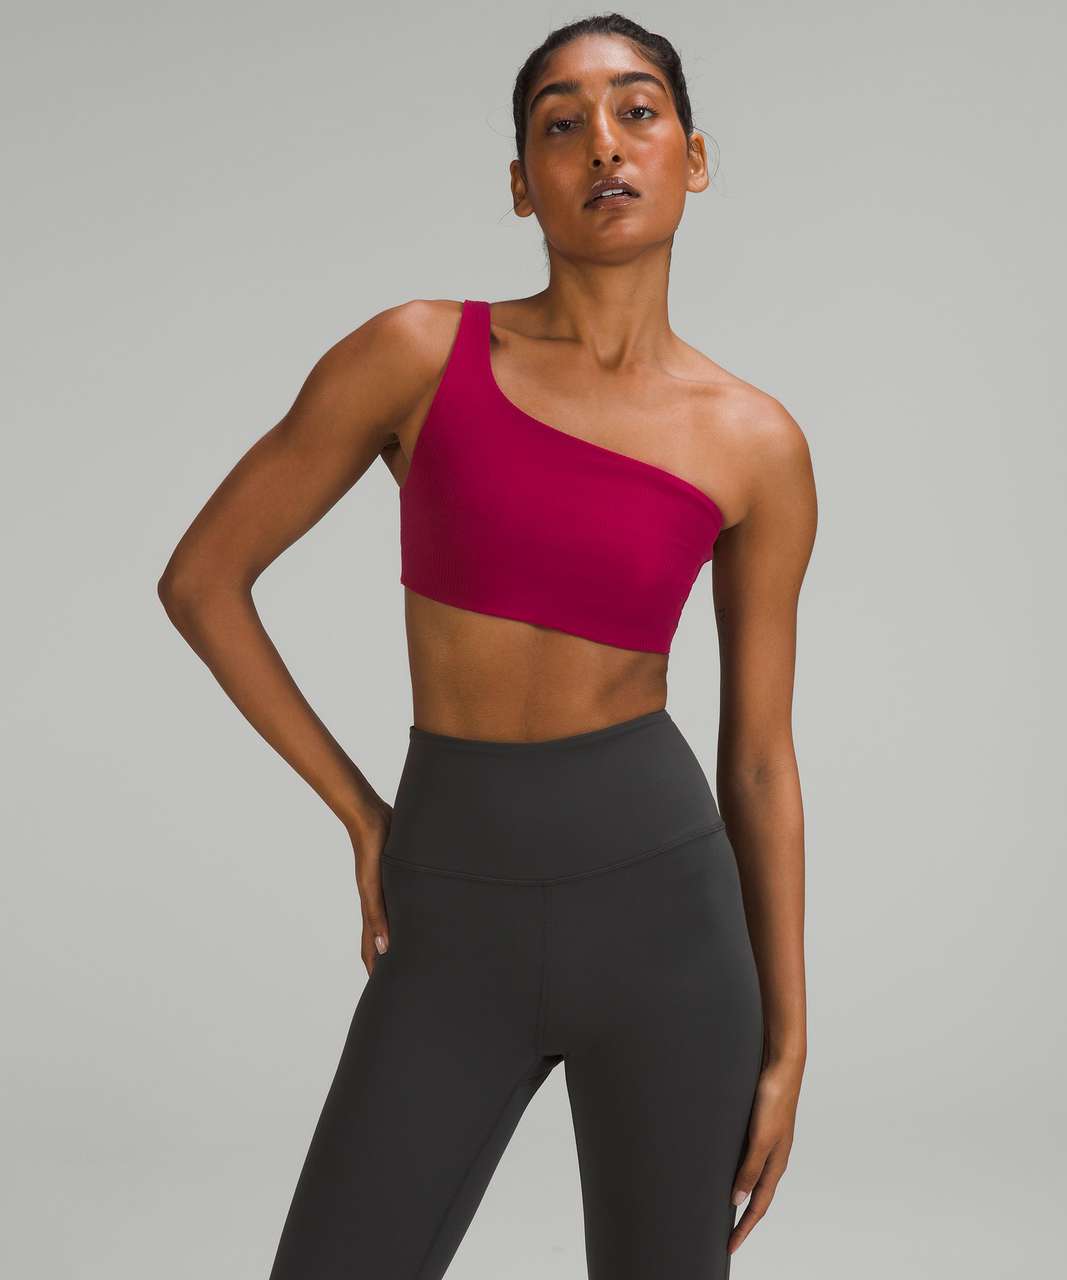 Nulu and Mesh Yoga Bra*Light Support, A/B Cup